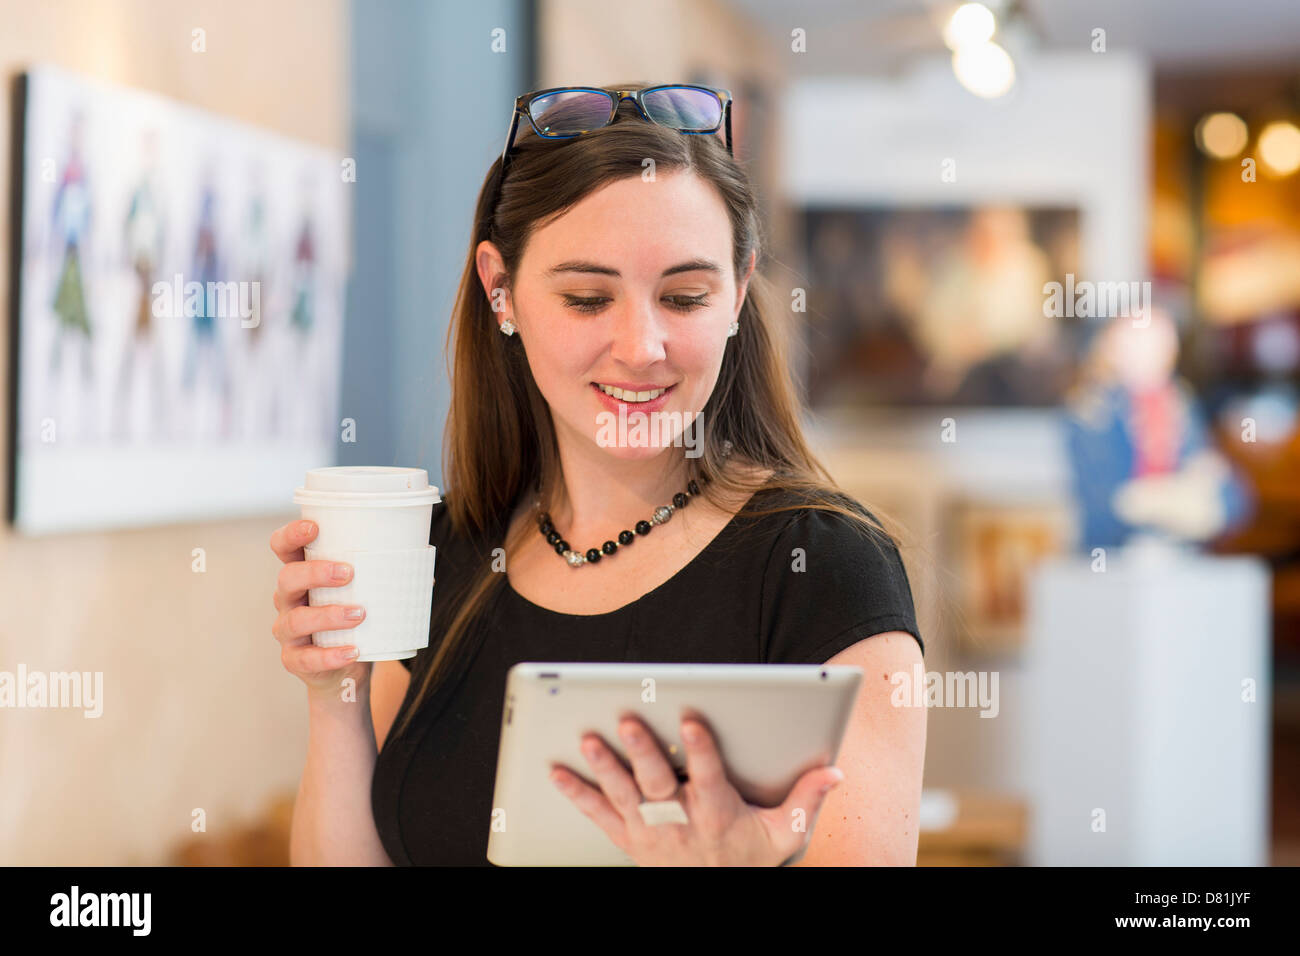 Caucasian woman using tablet computer in art gallery Stock Photo